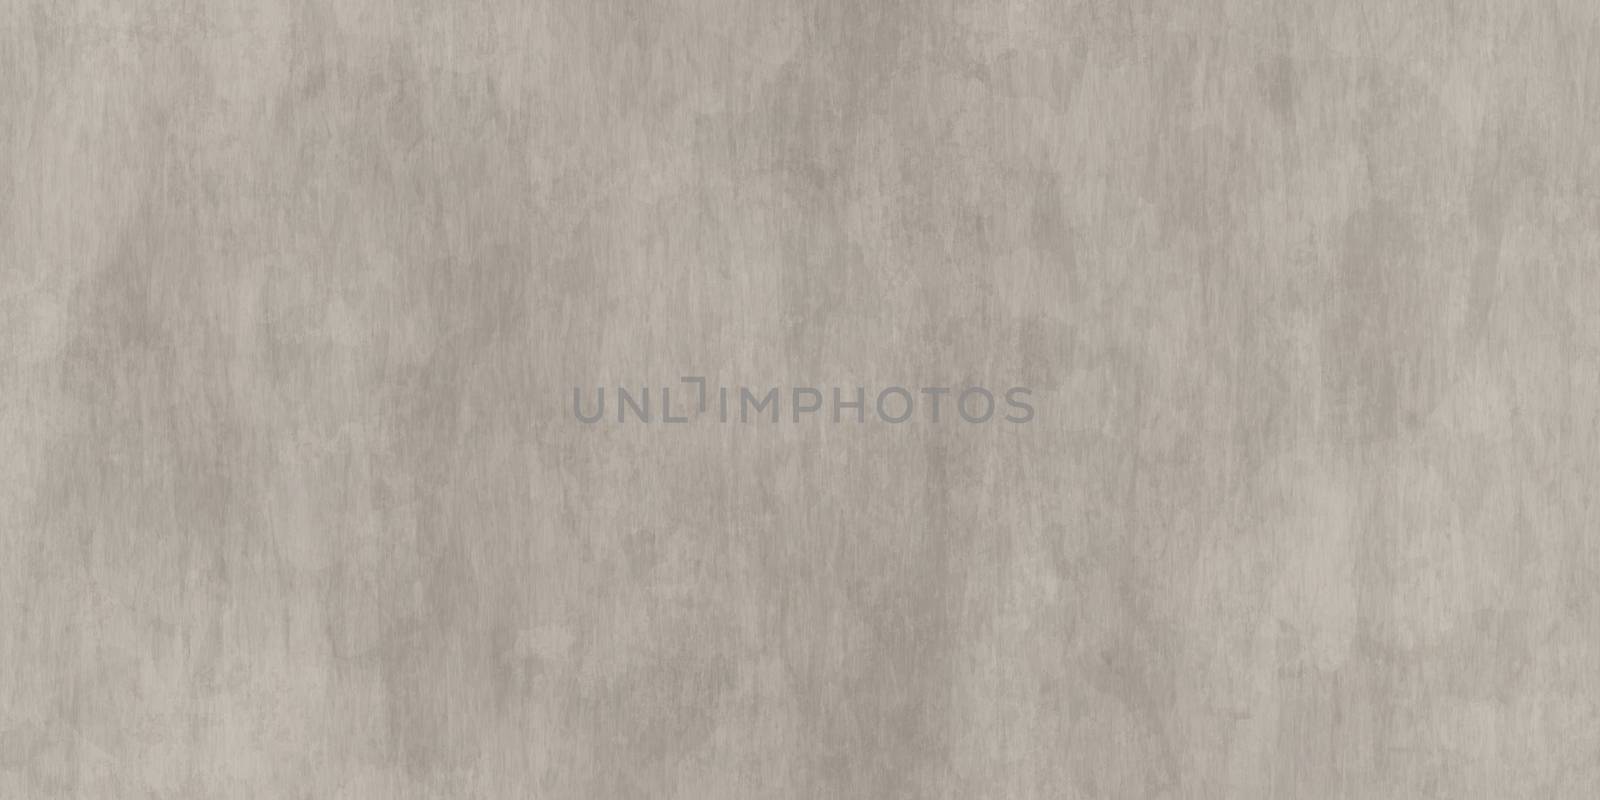 Clear Seamless Smooth Concrete Background. Polished Urban Cement Wall Texture.